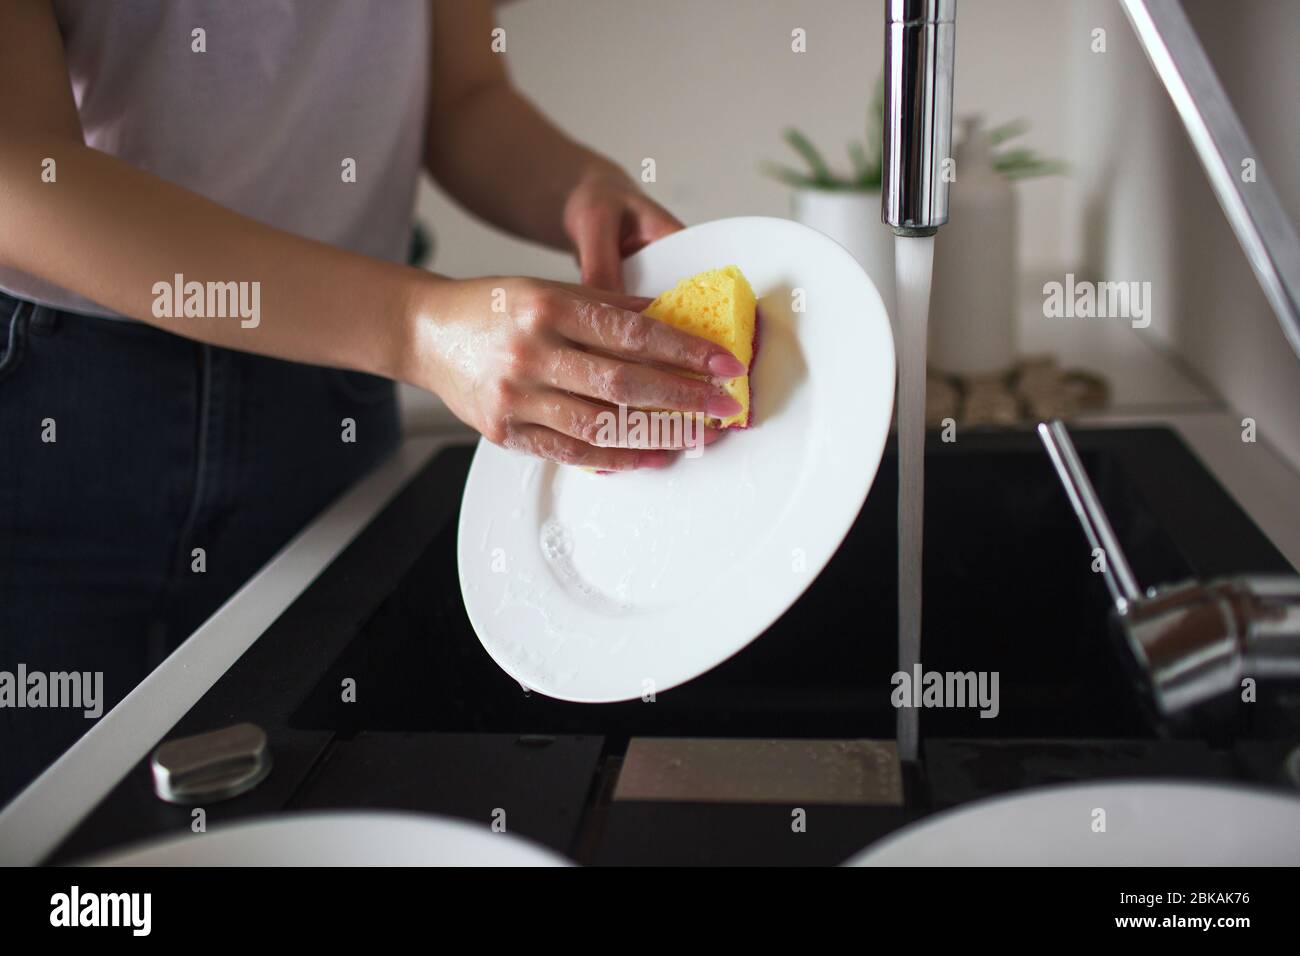 https://c8.alamy.com/comp/2BKAK76/young-woman-in-kitchen-during-quarantine-whshing-white-plates-with-sponge-and-dishwasher-cleaning-dishes-alone-in-kitchen-cut-view-2BKAK76.jpg